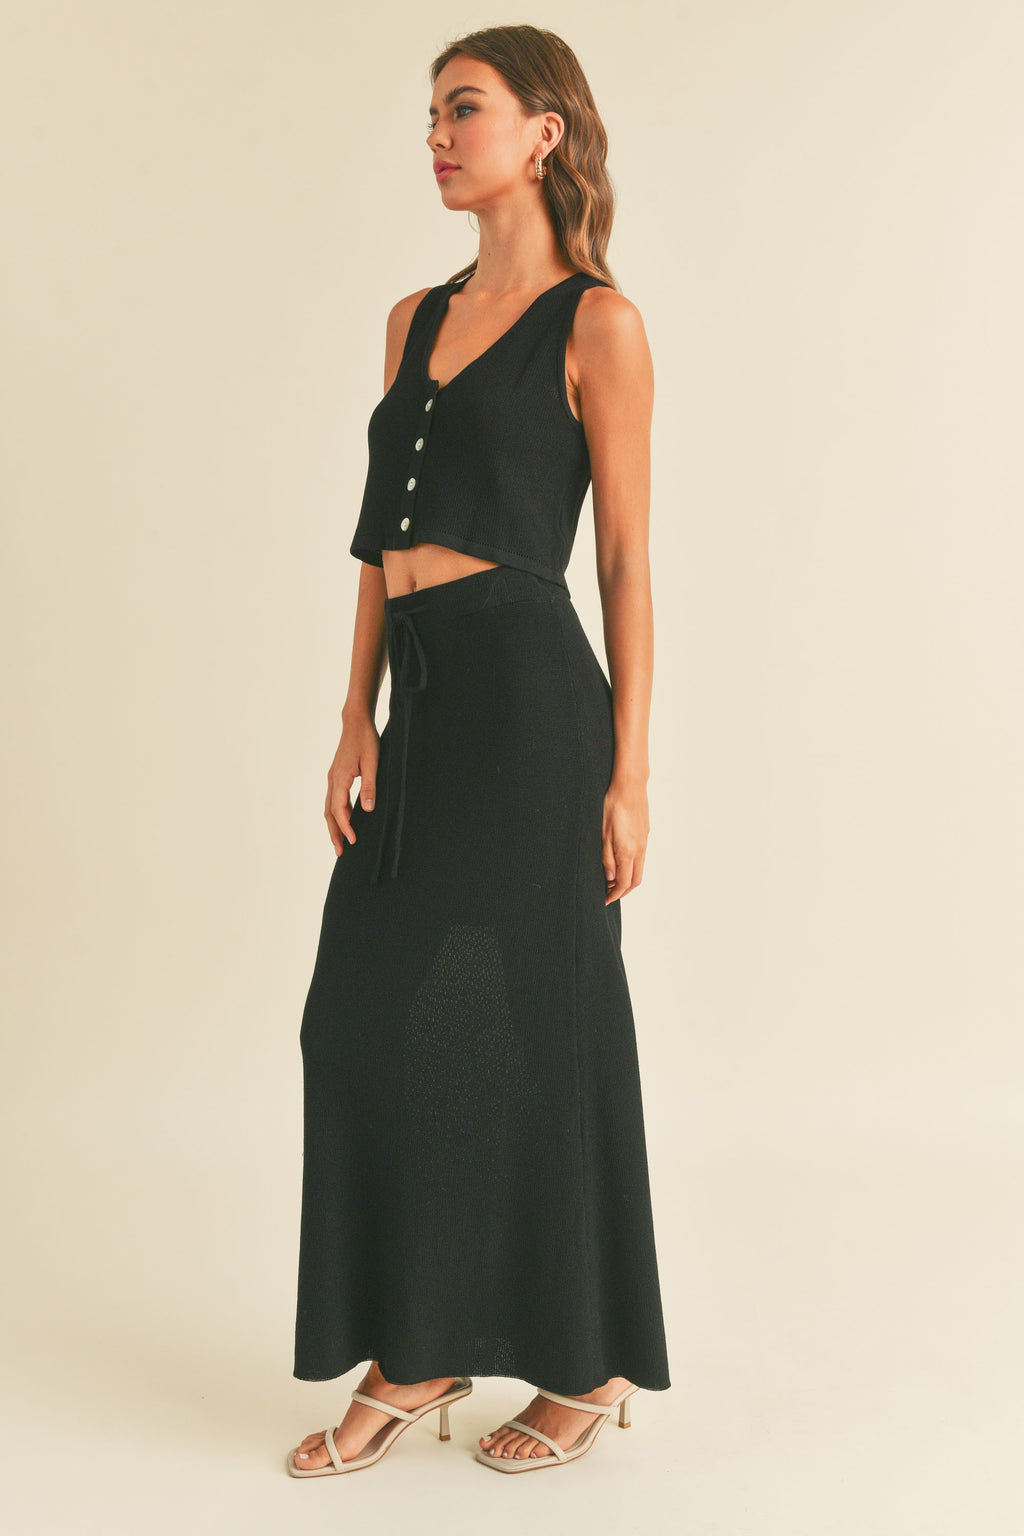 Ready SET go Two Piece crop top and skirt Set in BLACK